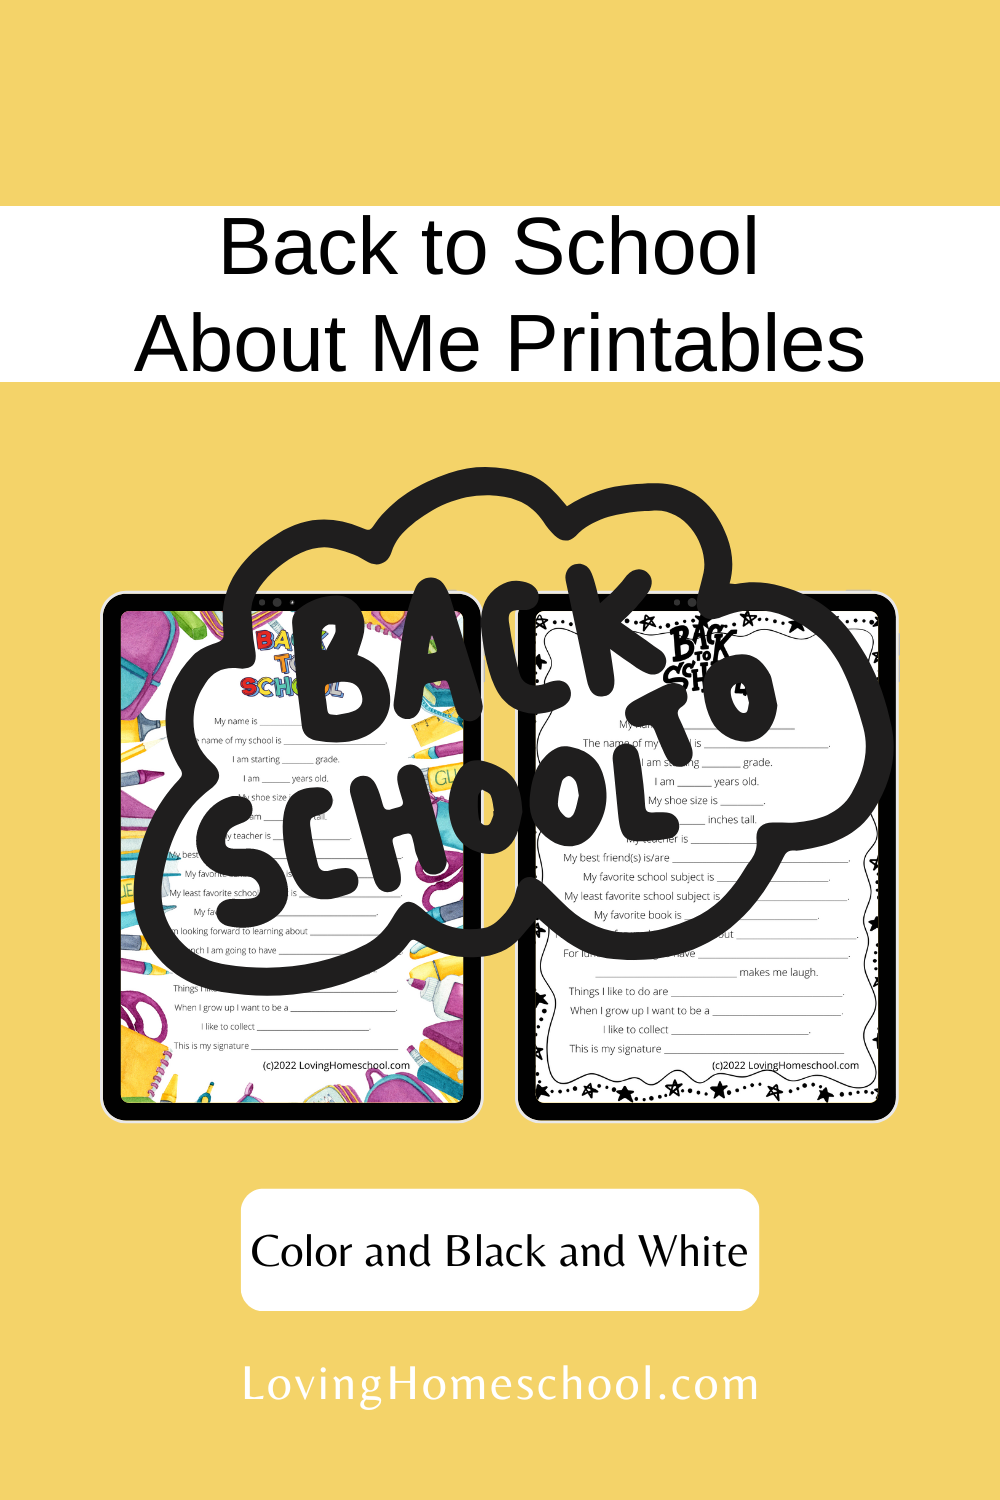 Back to School About Me Printables Pinterest Pin